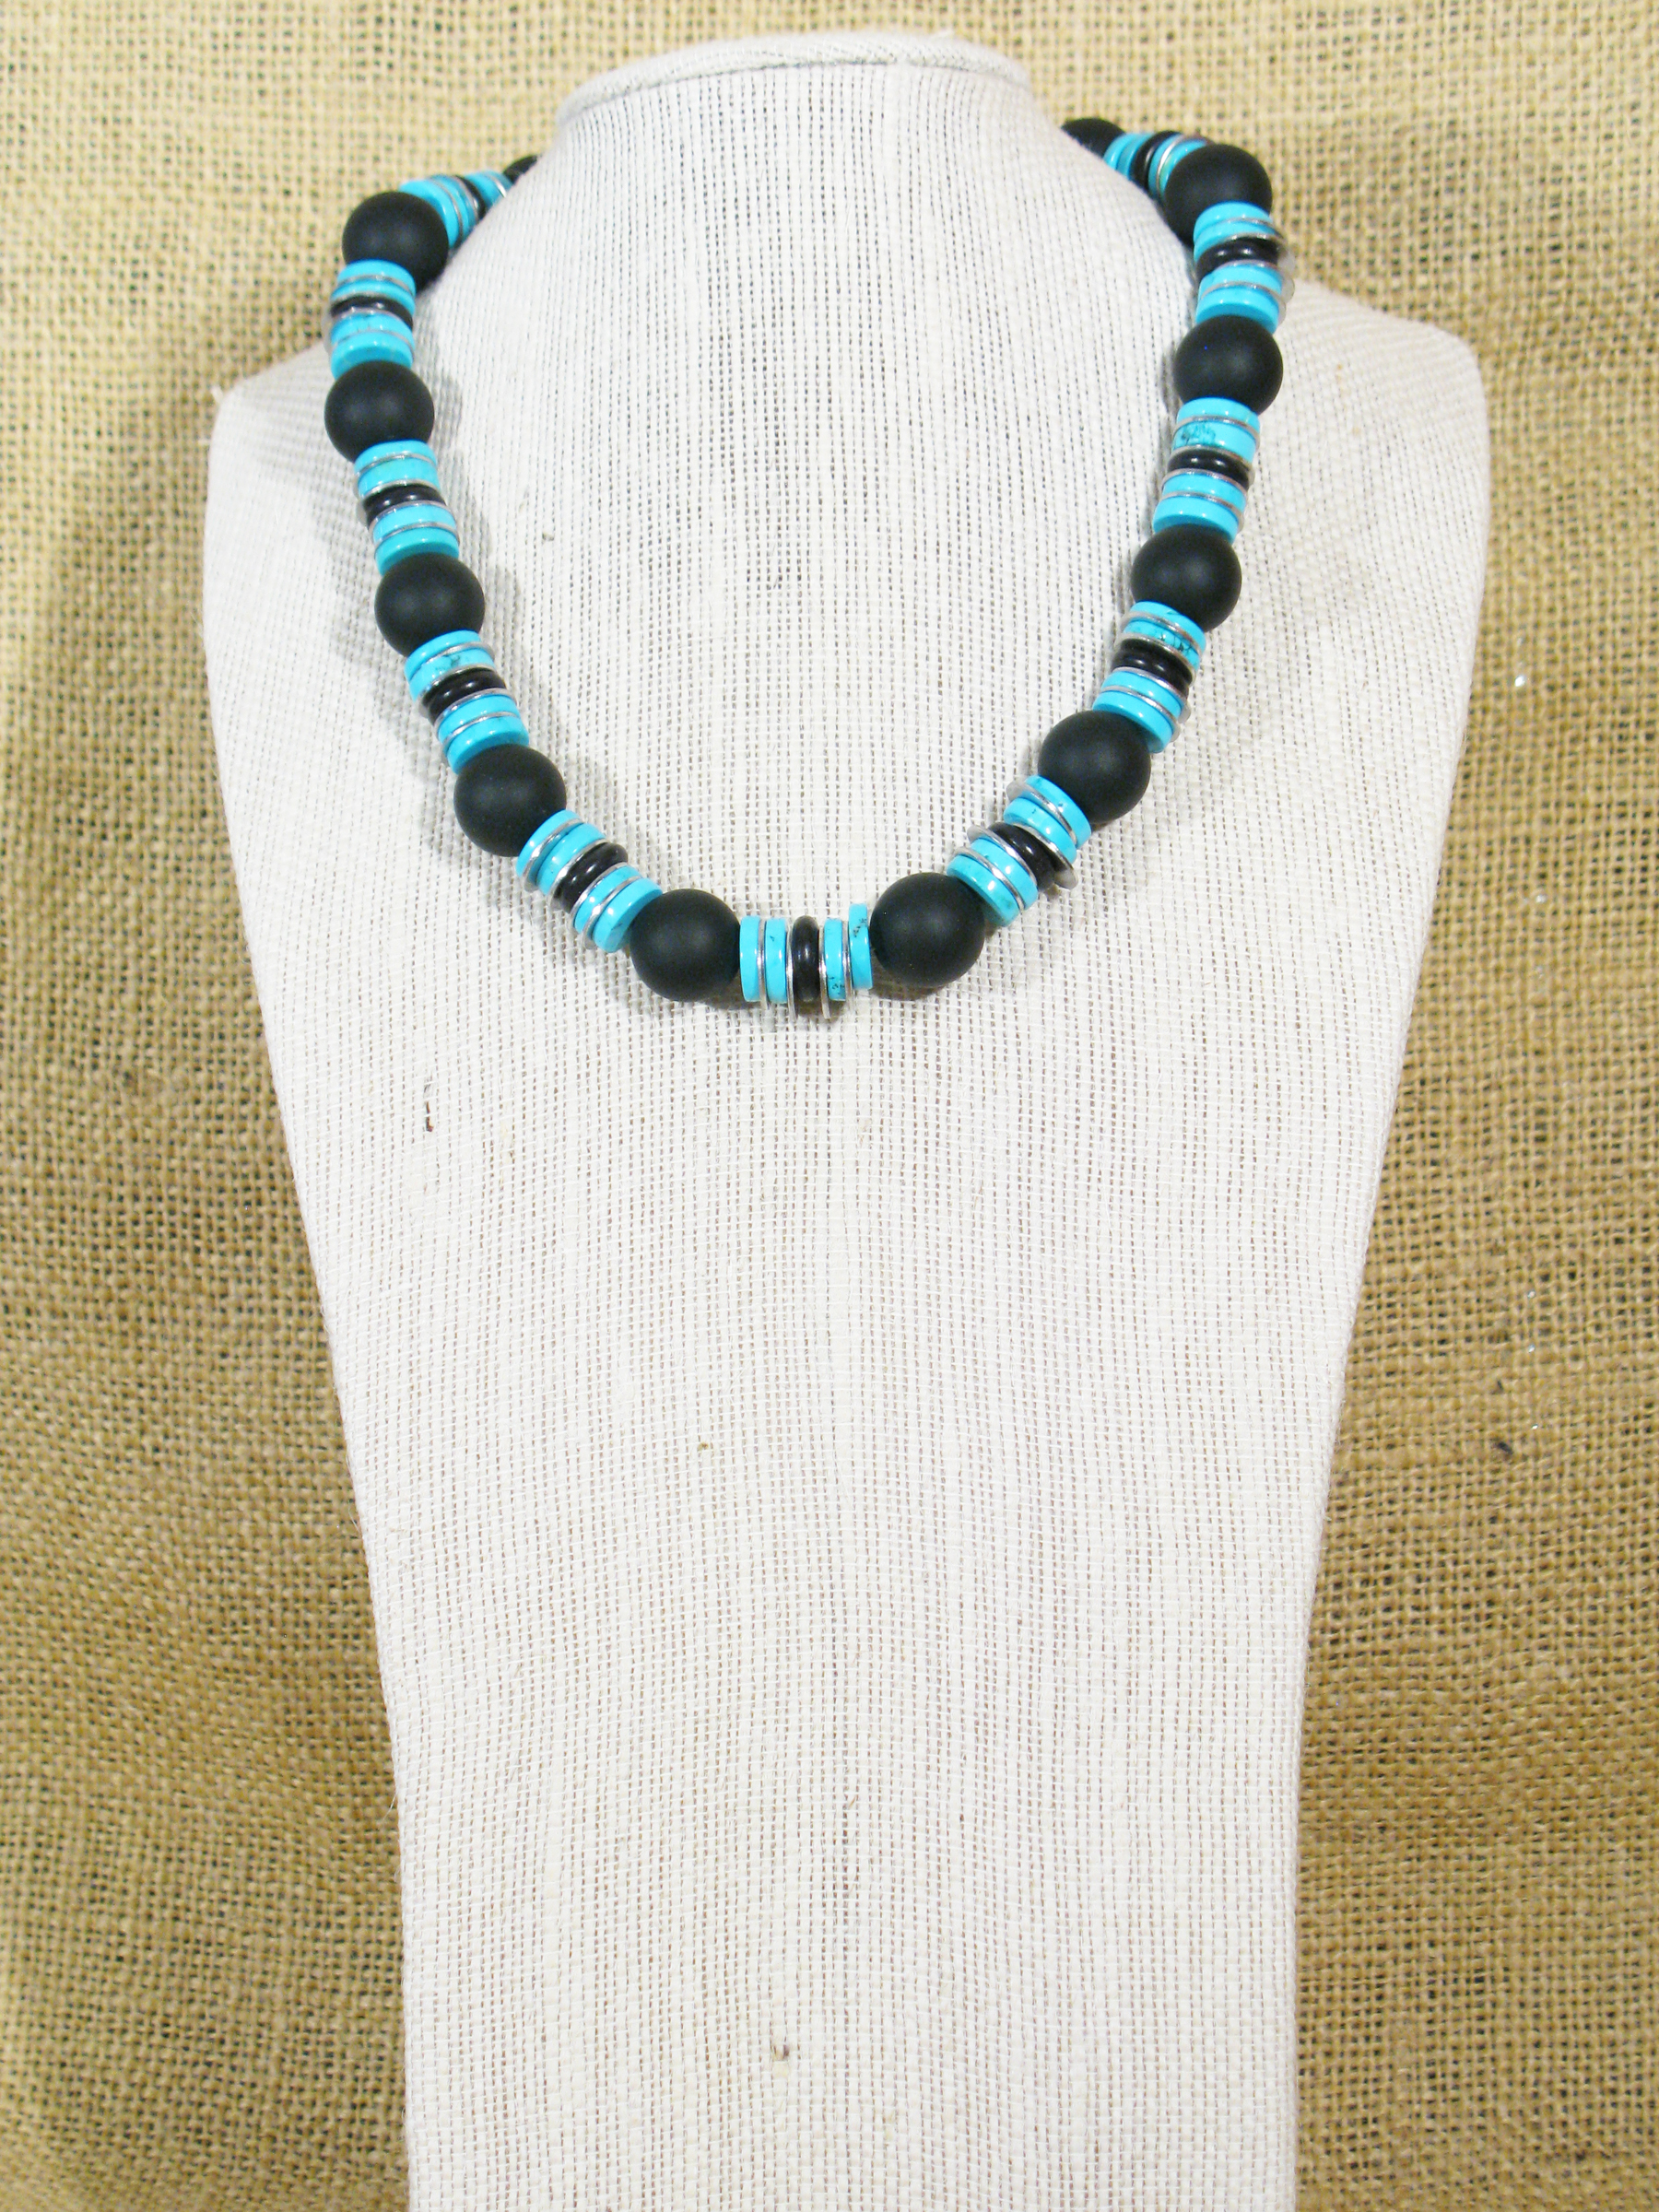 
BLACK AGATE, TURQUOISE HOWLITE, & STAINLESS STEEL NUTS WITH STERLING CLASP